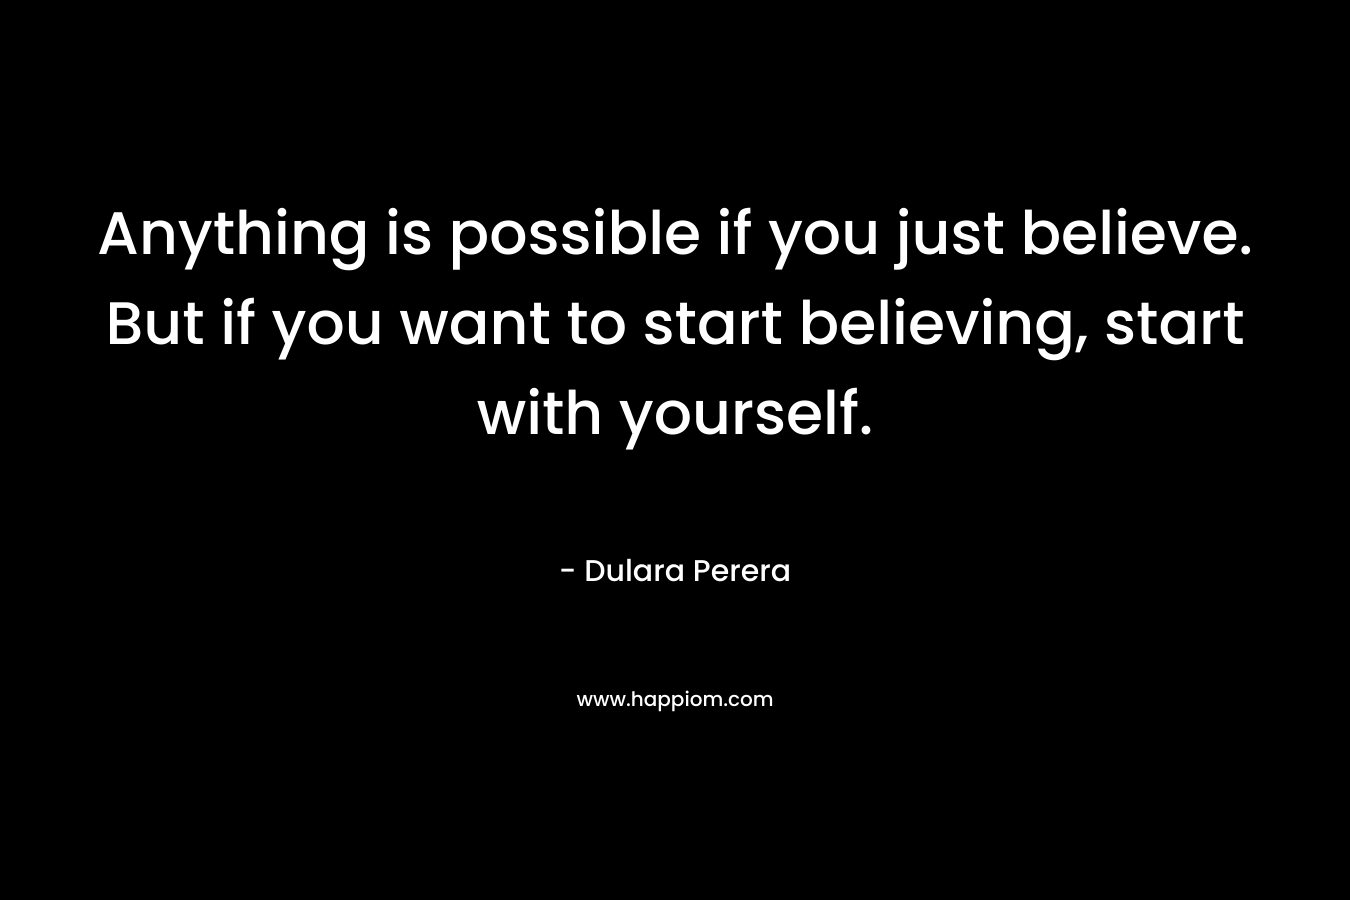 Anything is possible if you just believe. But if you want to start believing, start with yourself.